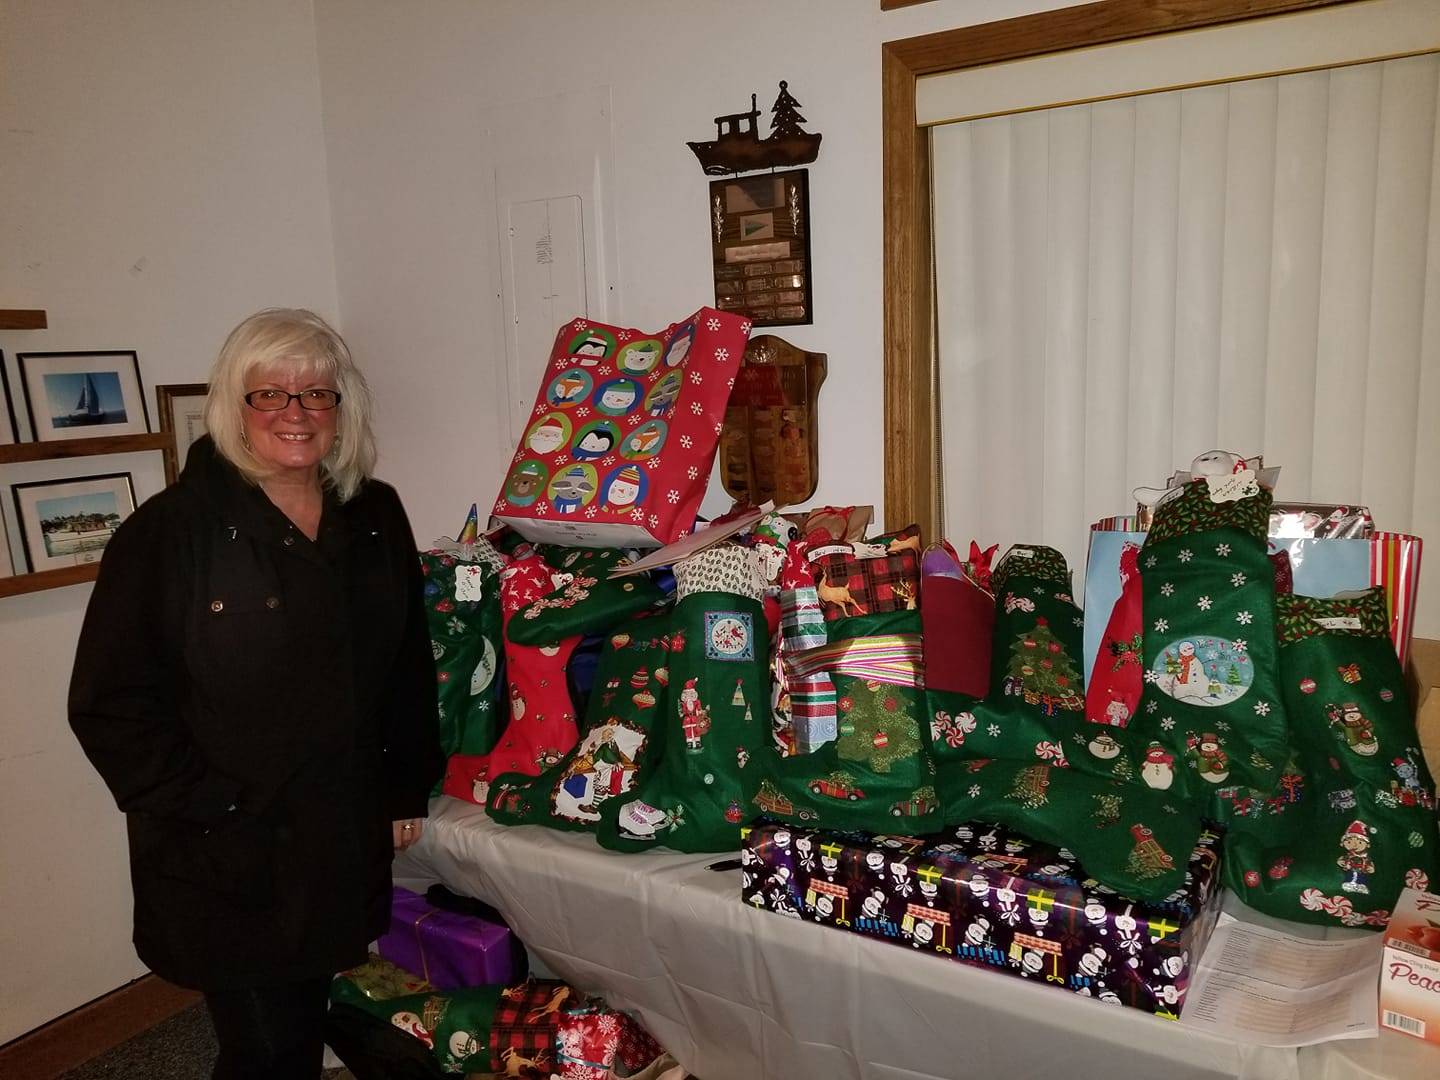 Kingston Cove Yacht Club spreads cheer through donated stockings